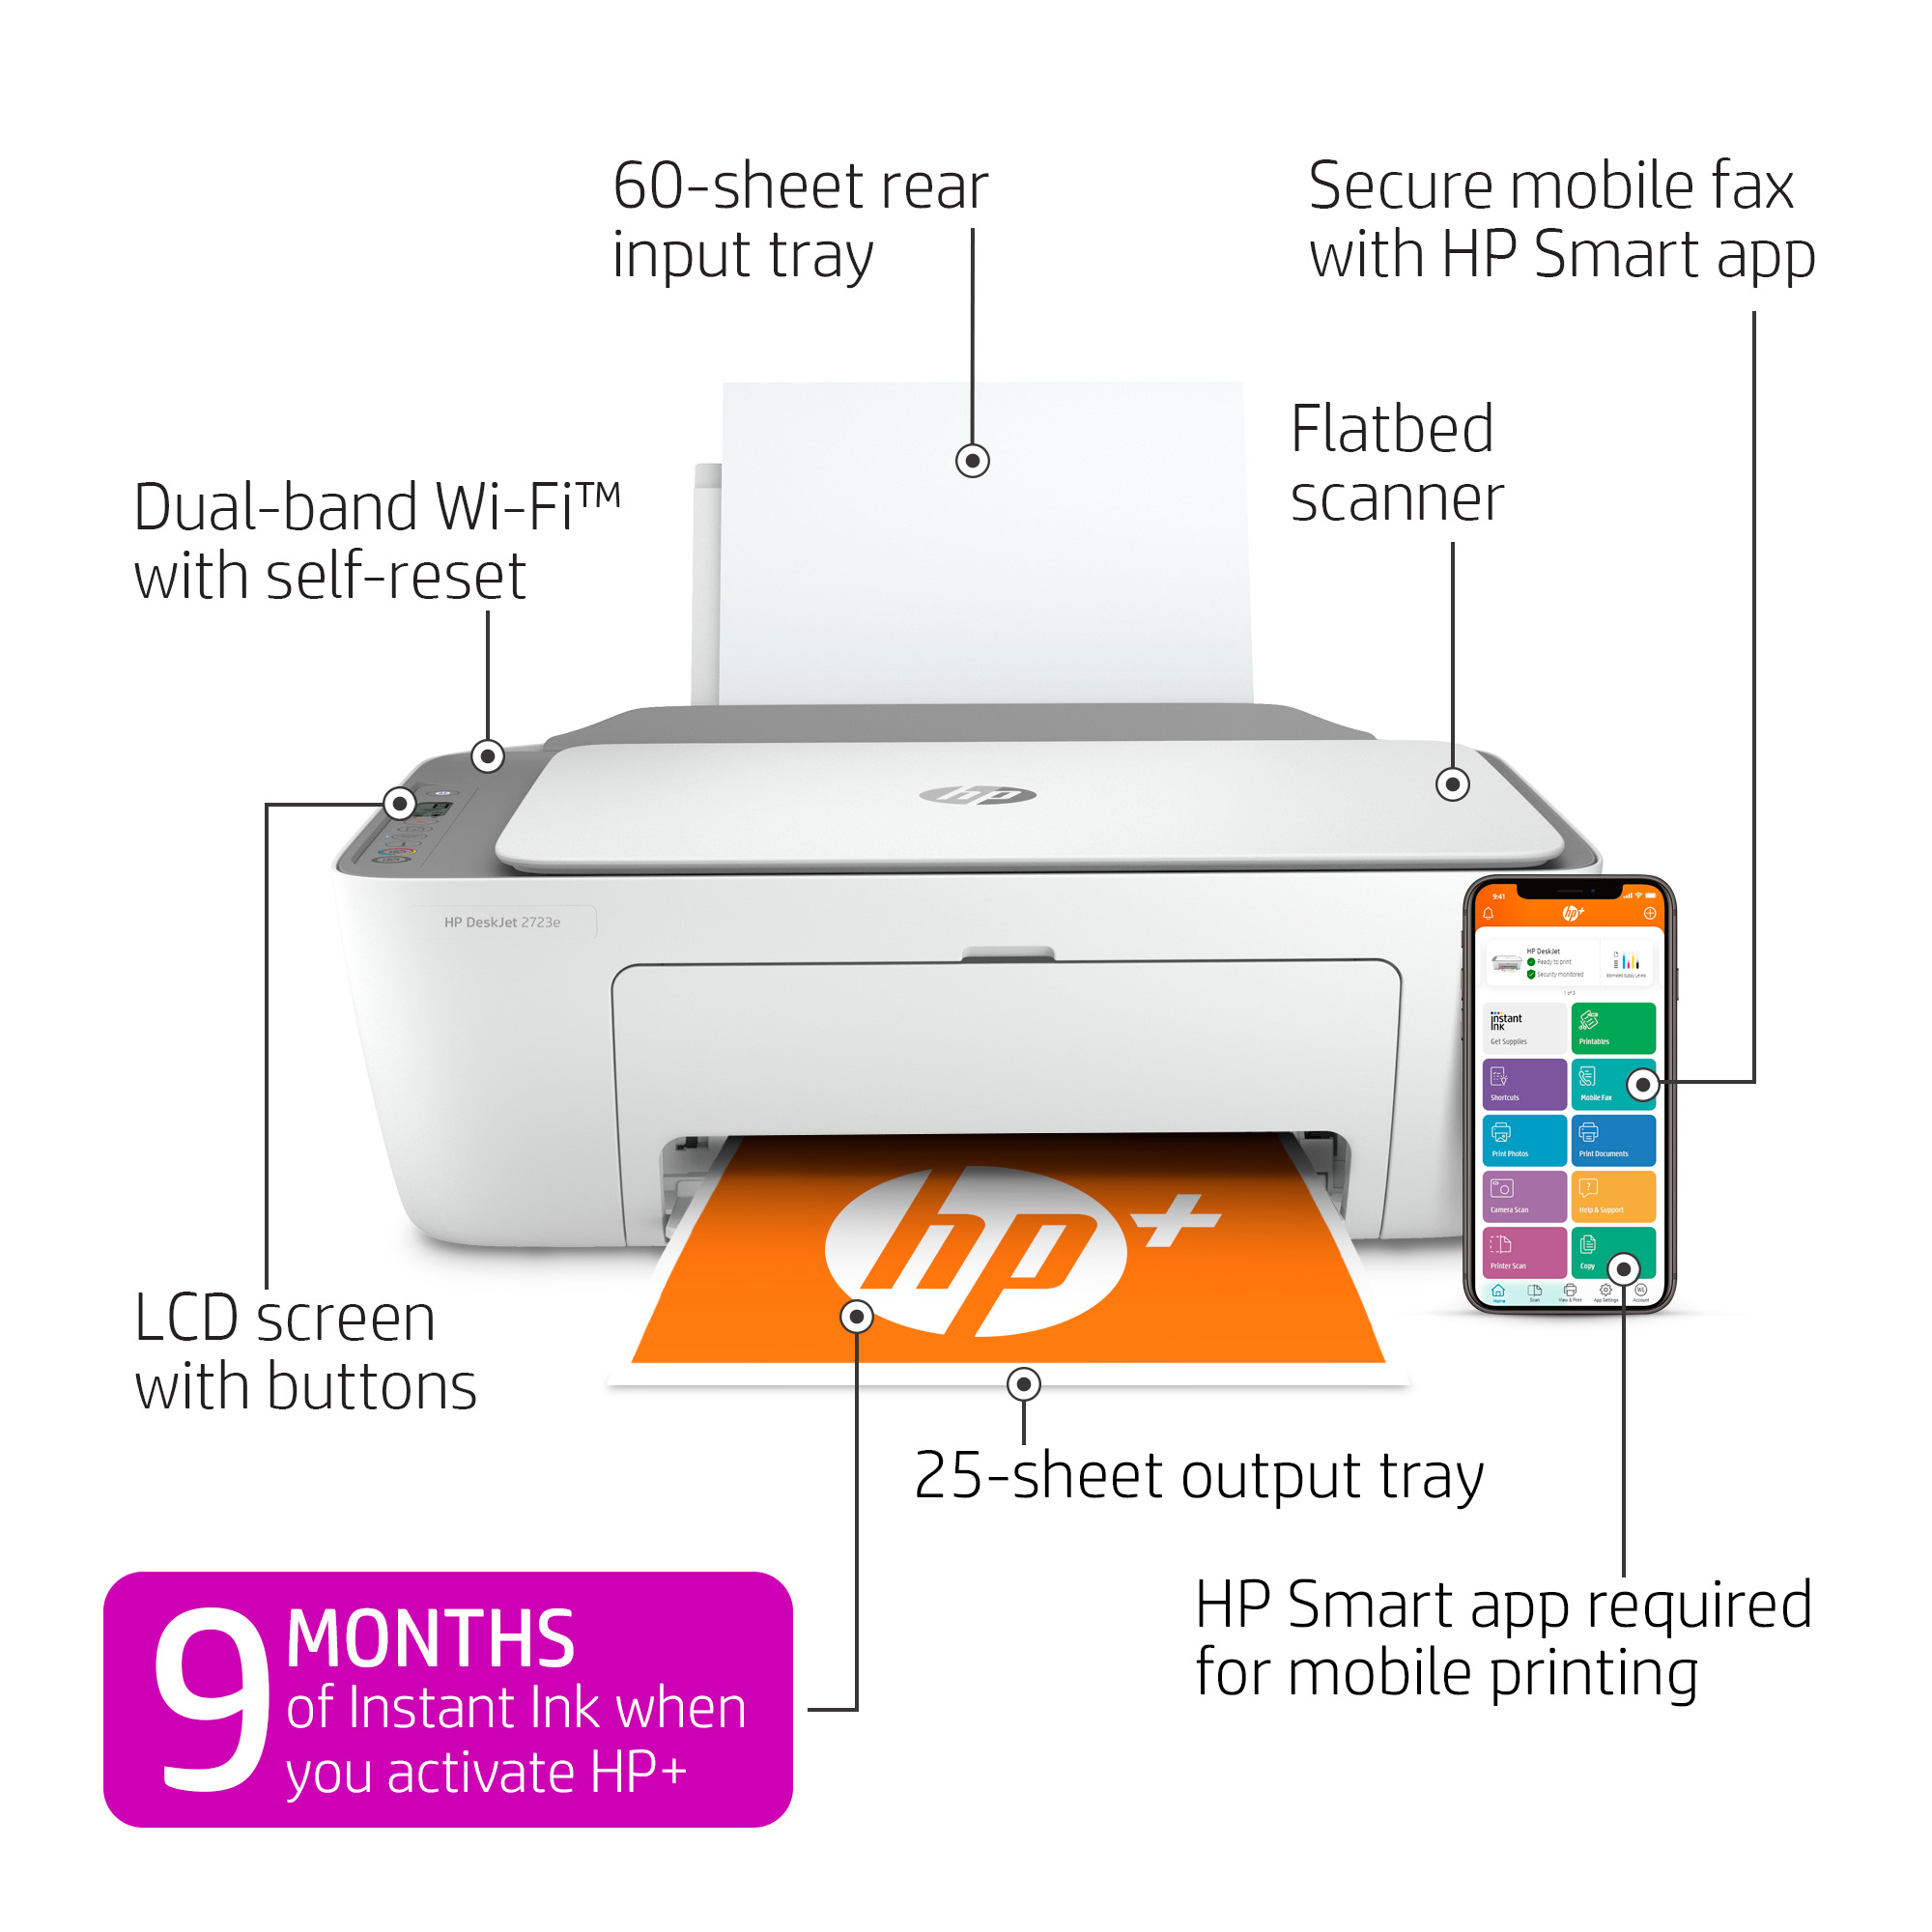 HP DeskJet 2723e All-in-One Wireless Color Inkjet Printer with 9 Months Instant Ink Included with HP+ - image 3 of 10